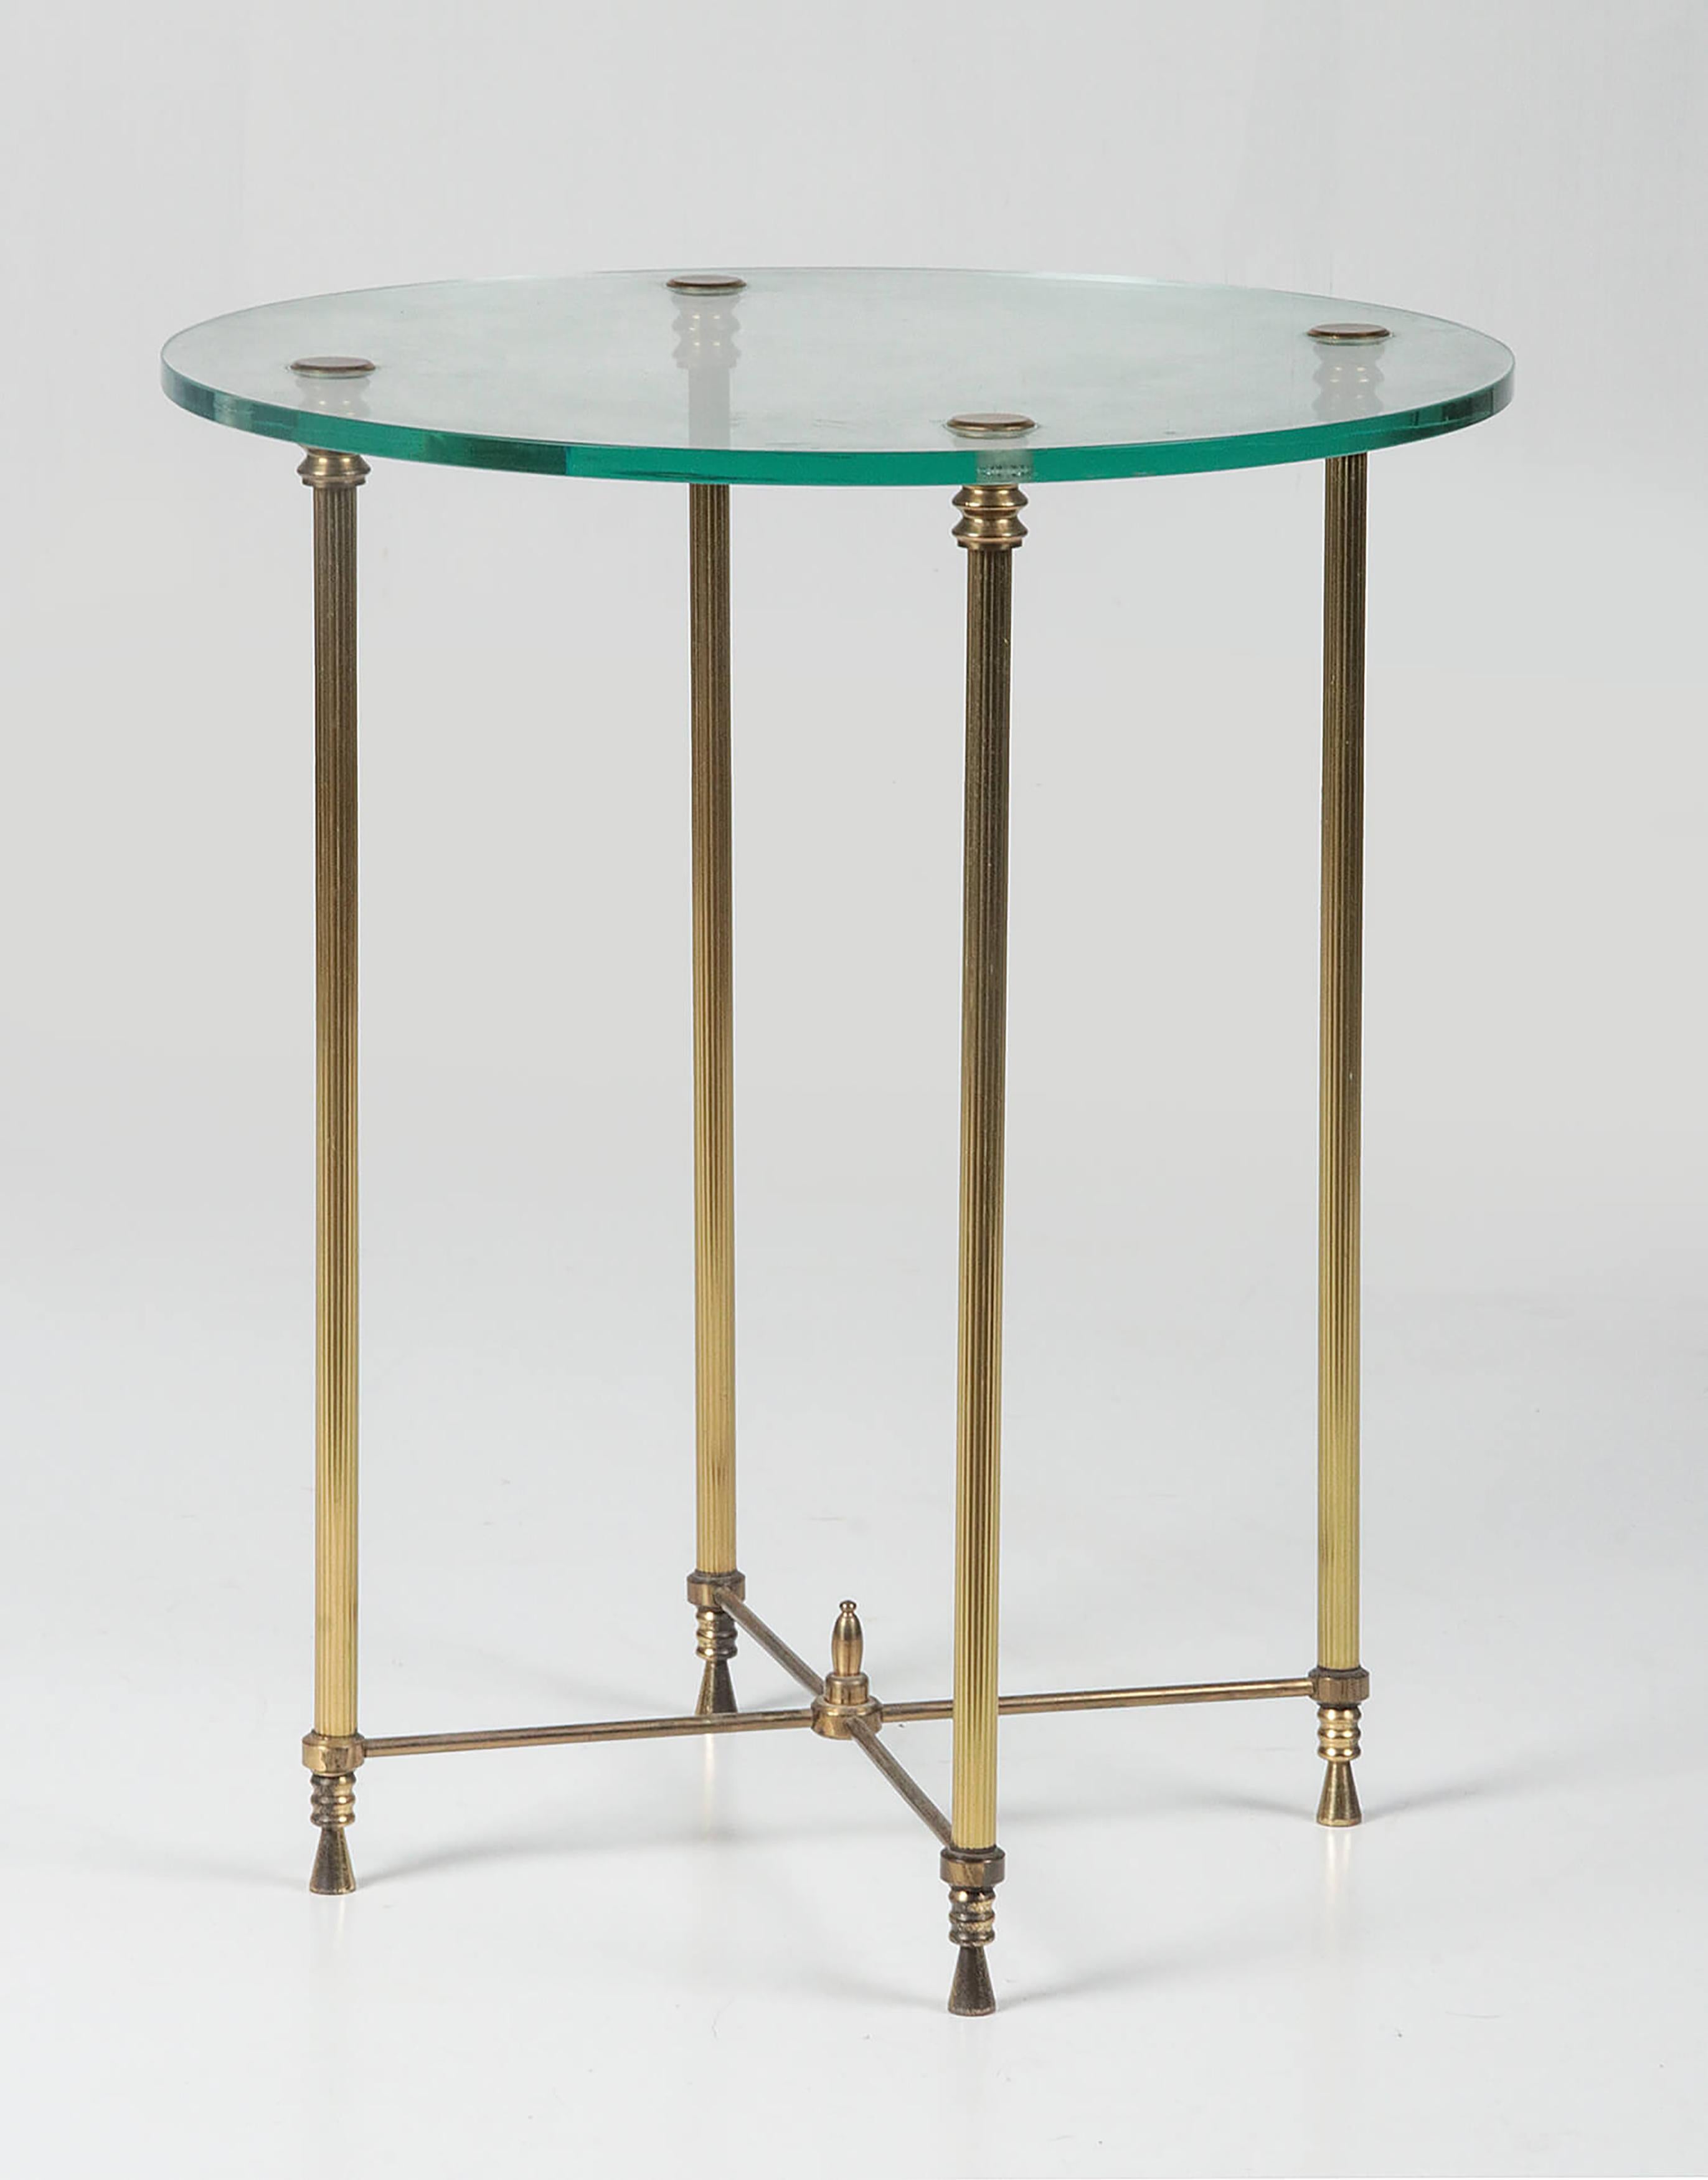 Elegant and graceful side table. It is a round model with a glass top and a copper base. The copperwork has fluted legs. The table is in good condition.